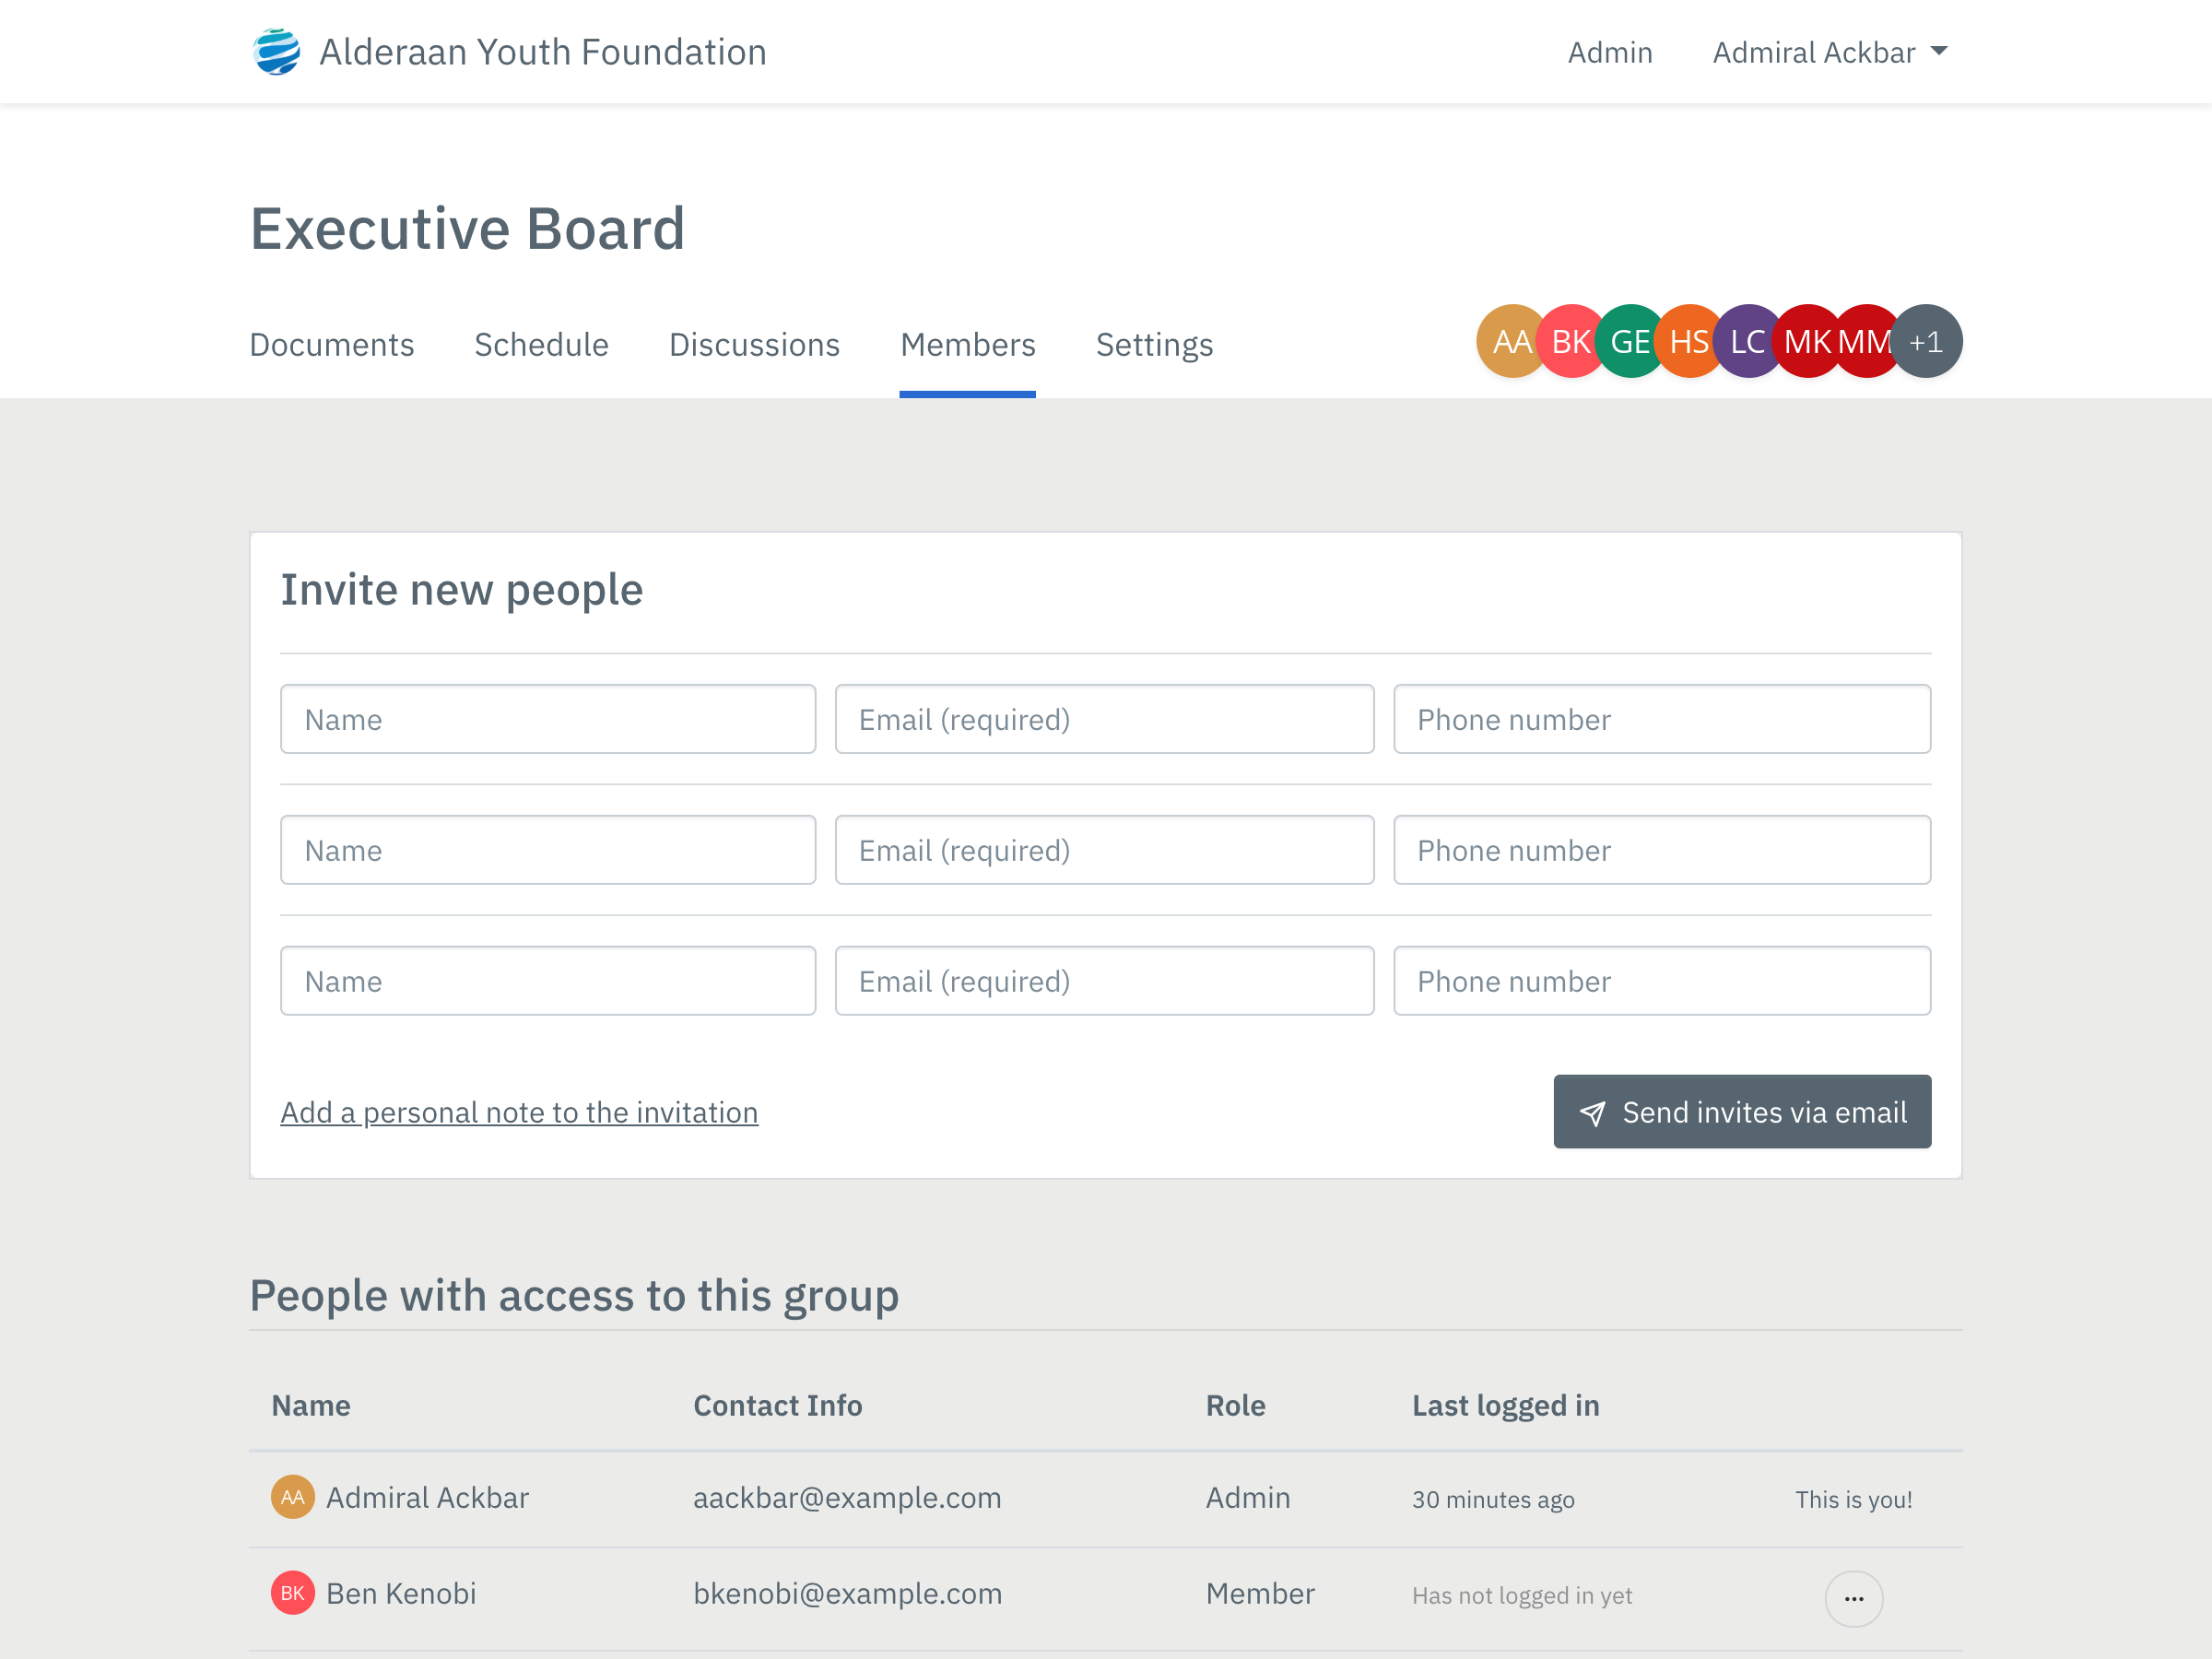 Adding and removing members in BoardBinder